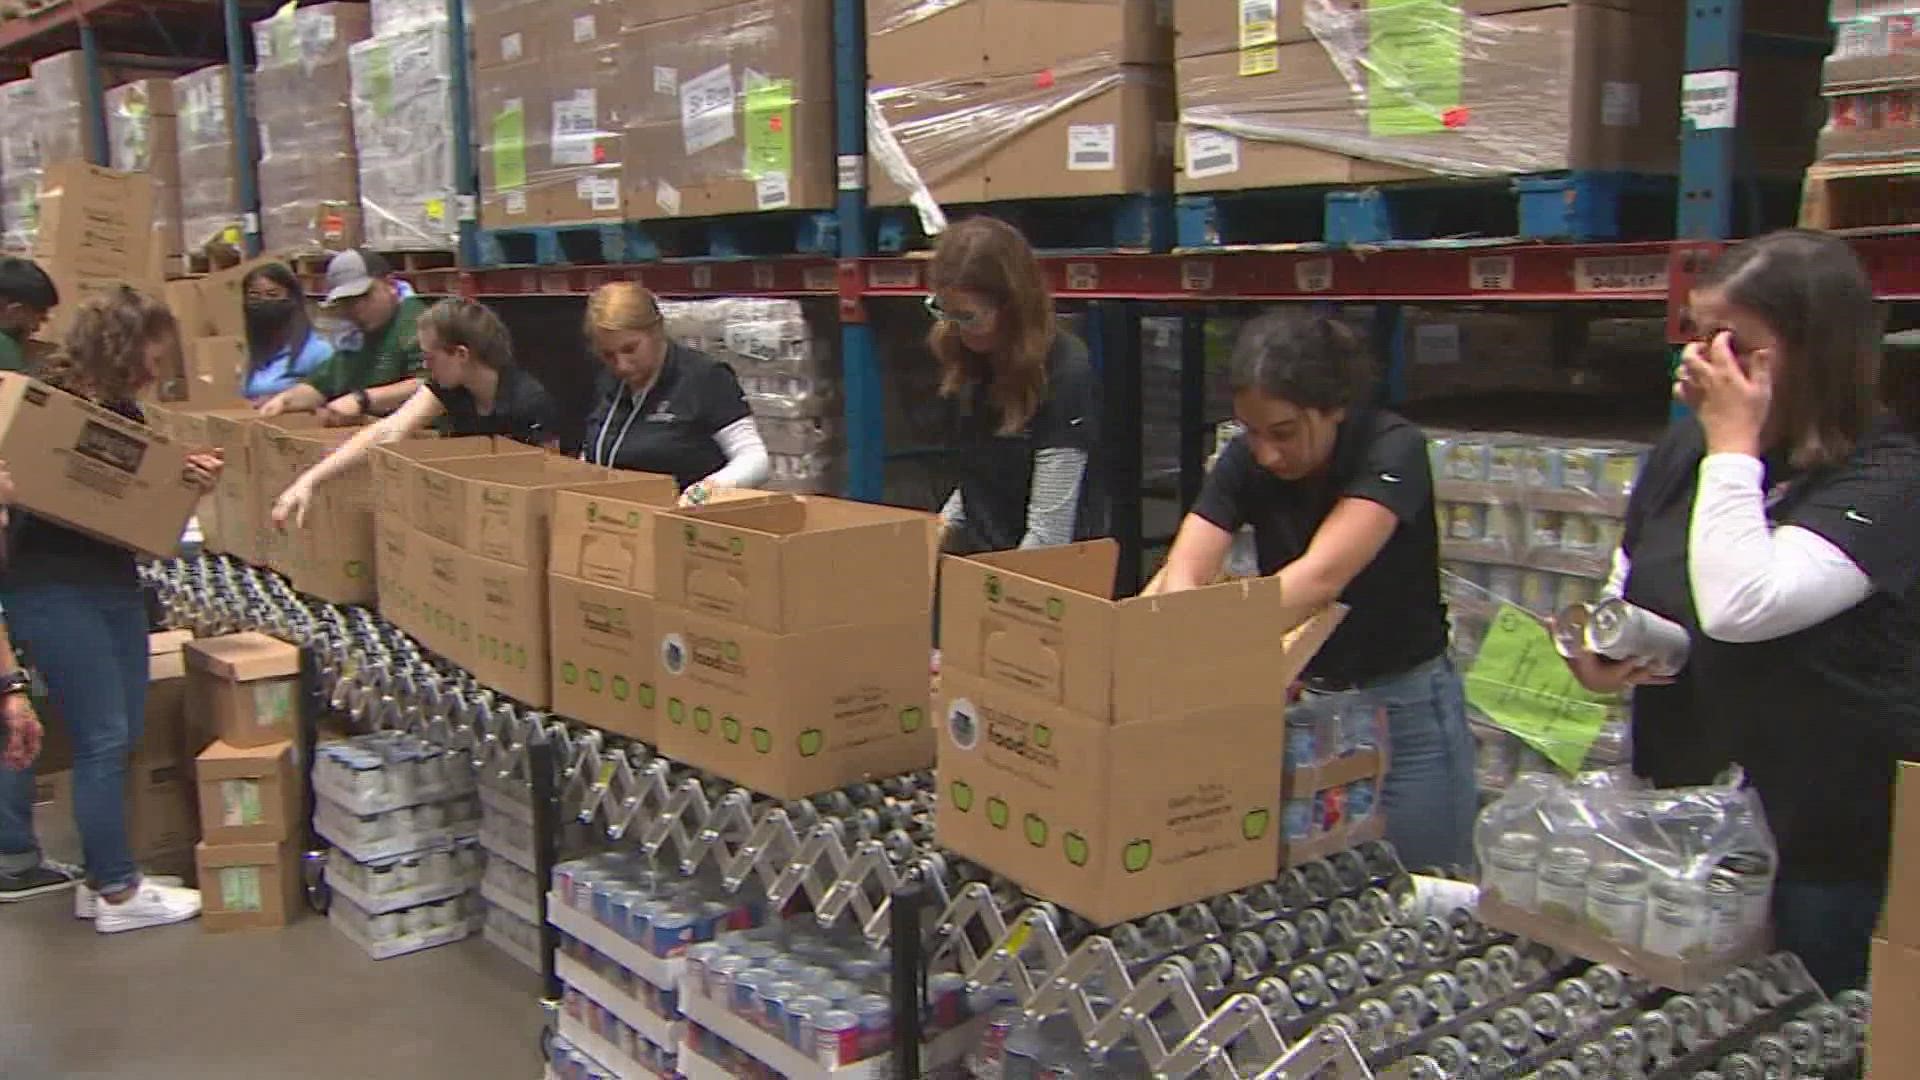 The country's largest food bank serves about 1 million people in 18 Southeast Texas counties. Some of the volunteers helping are kids and teens.